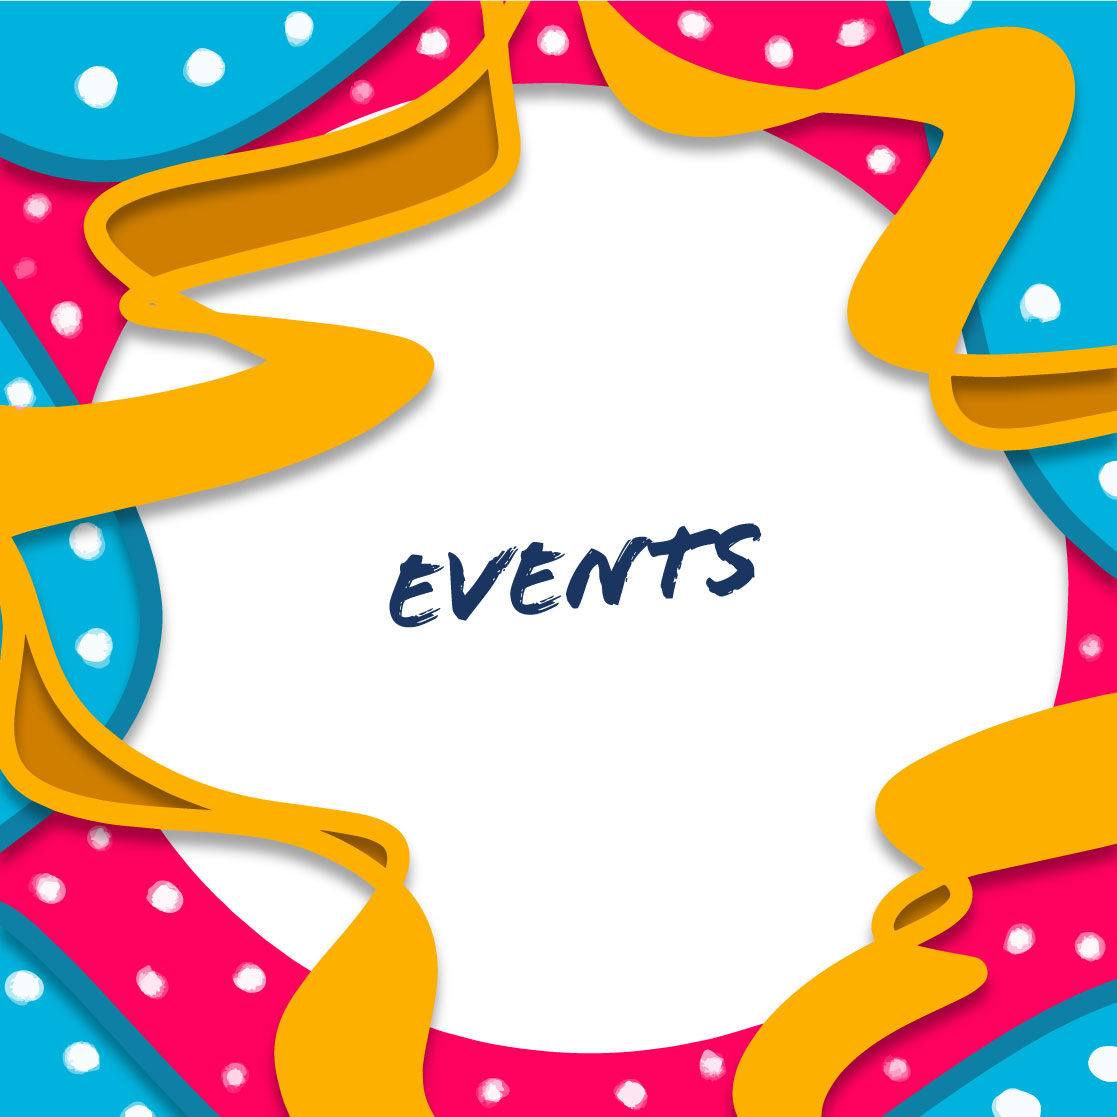 Events graphic